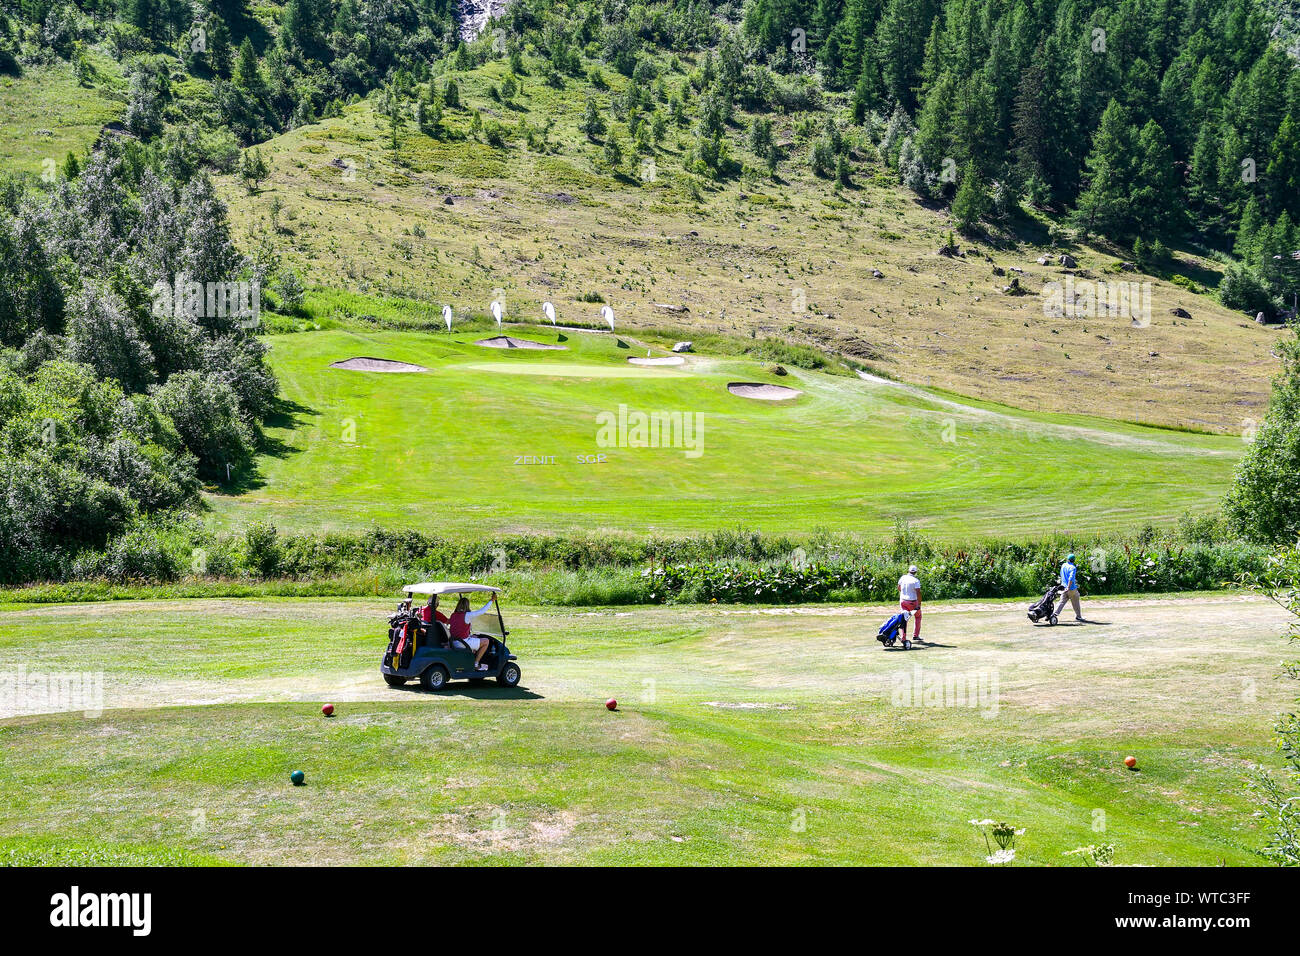 Scenic view of a mountain golf course with middle-aged people on a golf cart and carrying golf bags, Val Ferret, Courmayeur, Aosta Valley, Alps, Italy Stock Photo